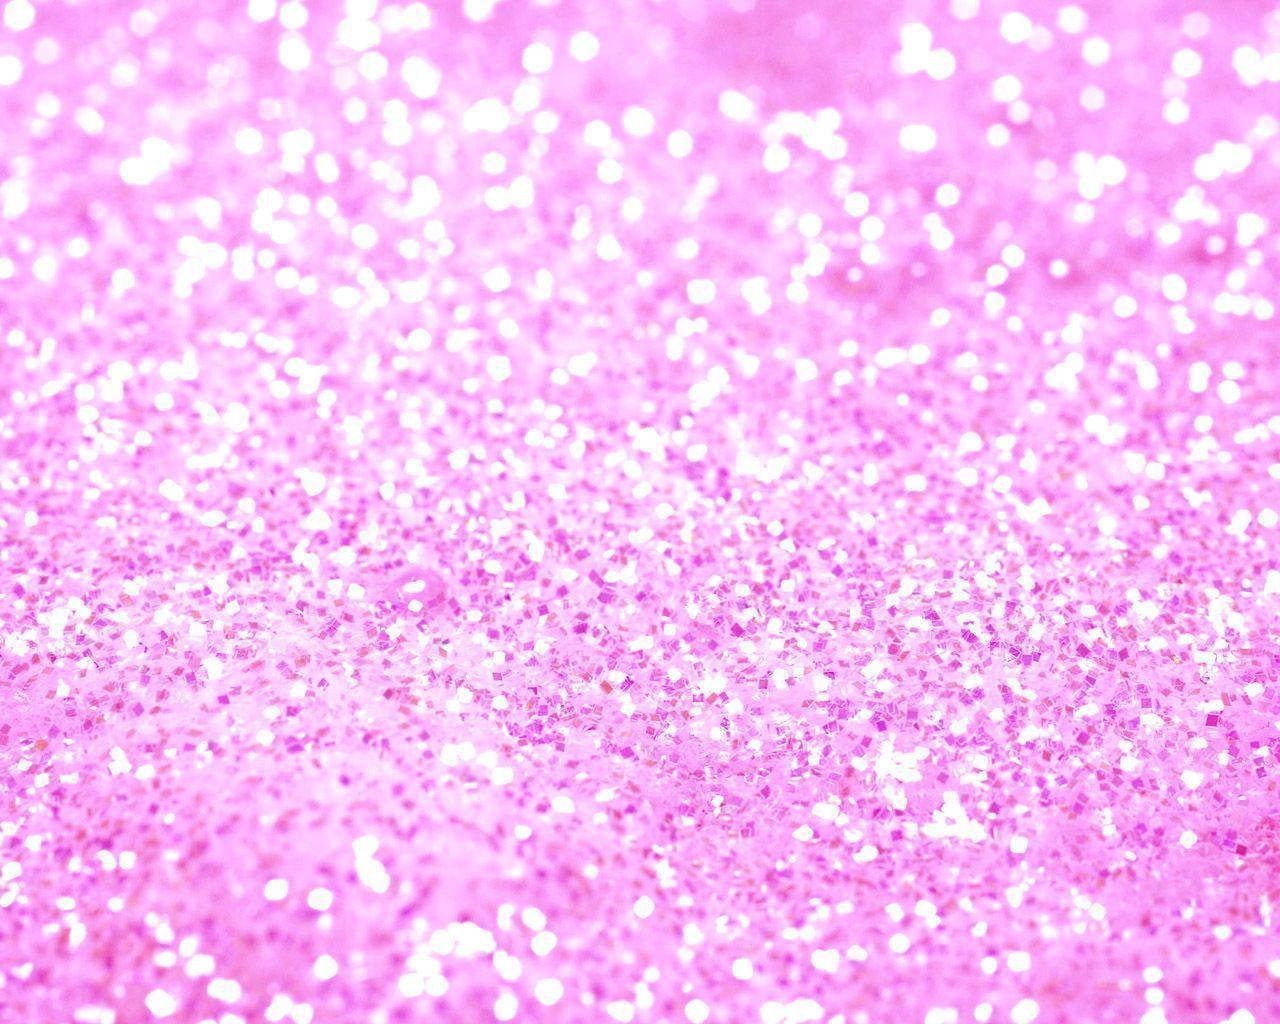 Glitter 1280X1024 Wallpaper and Background Image